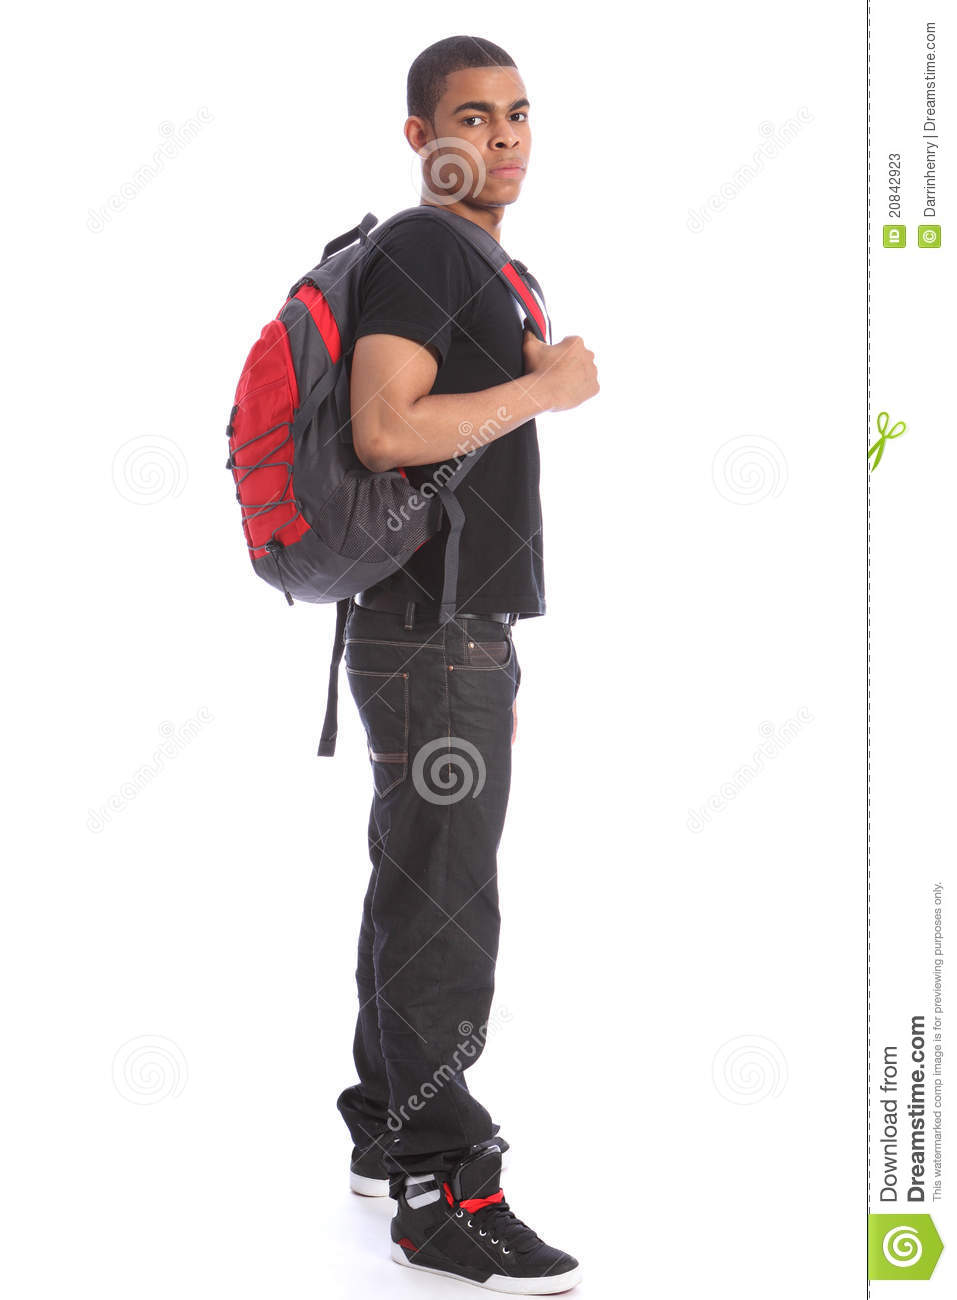 Student Wearing Jeans And T Shirt Standing With School Backpack